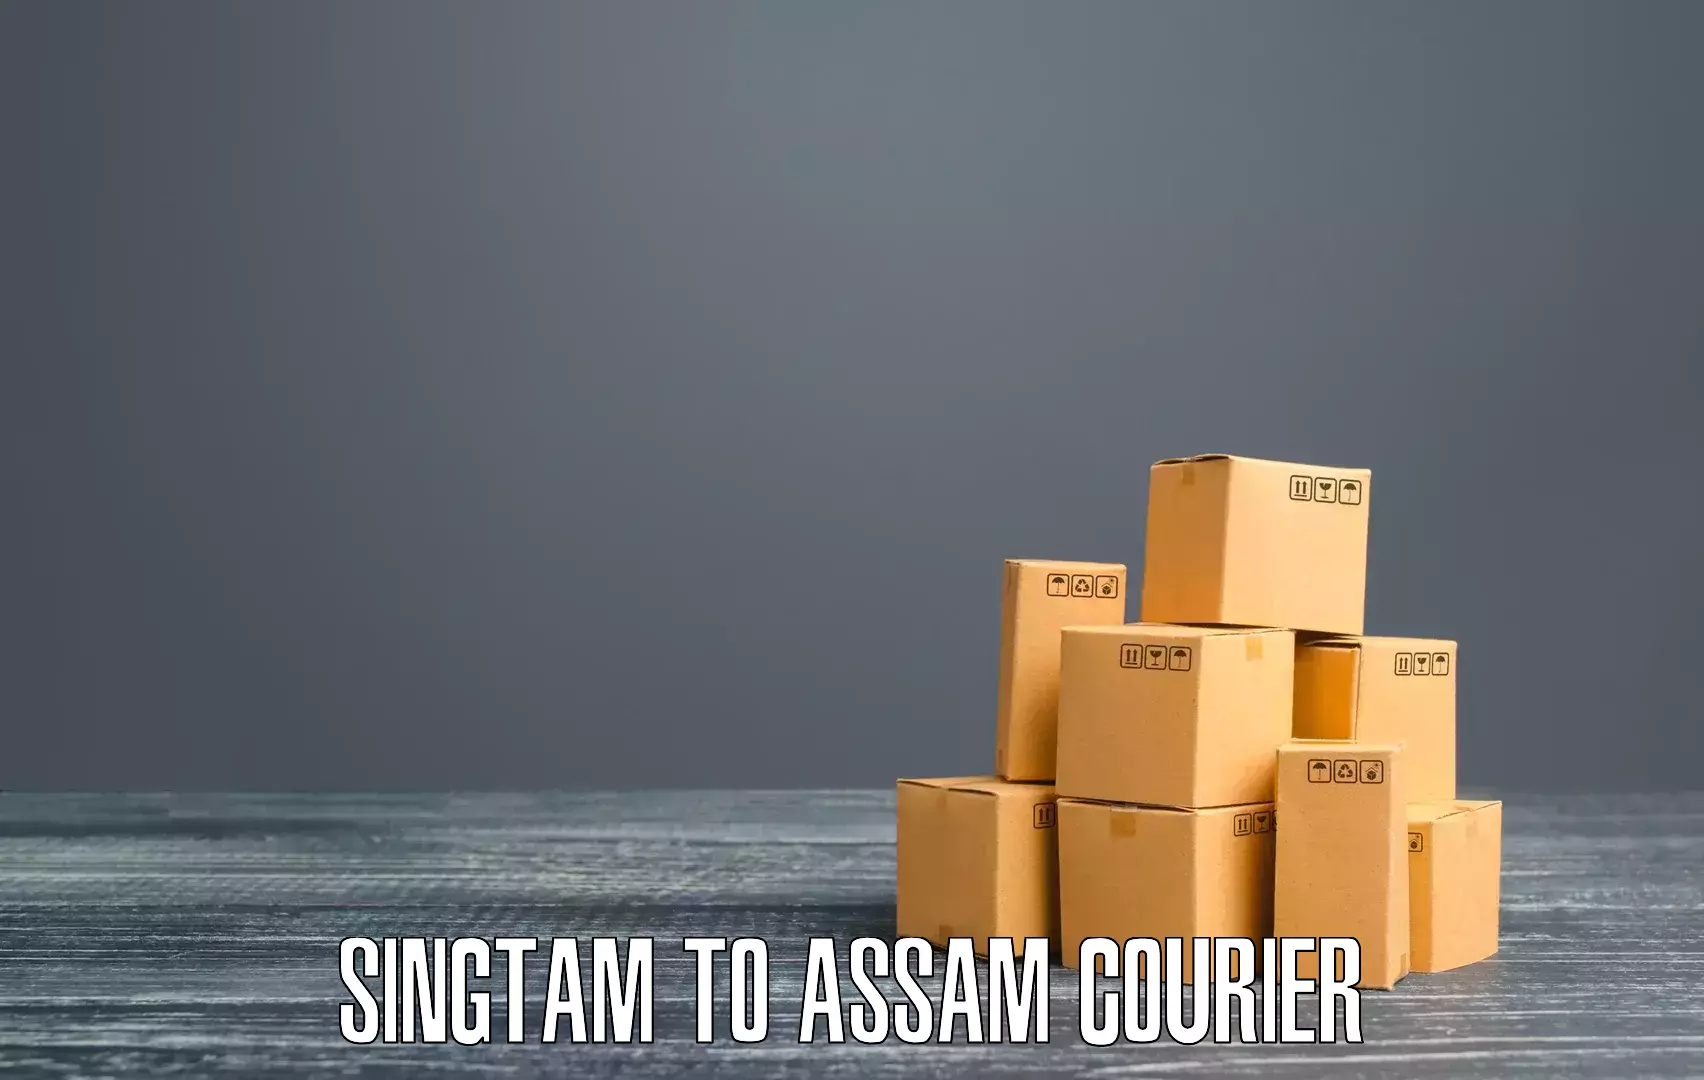 Multi-national courier services Singtam to Karbi Anglong